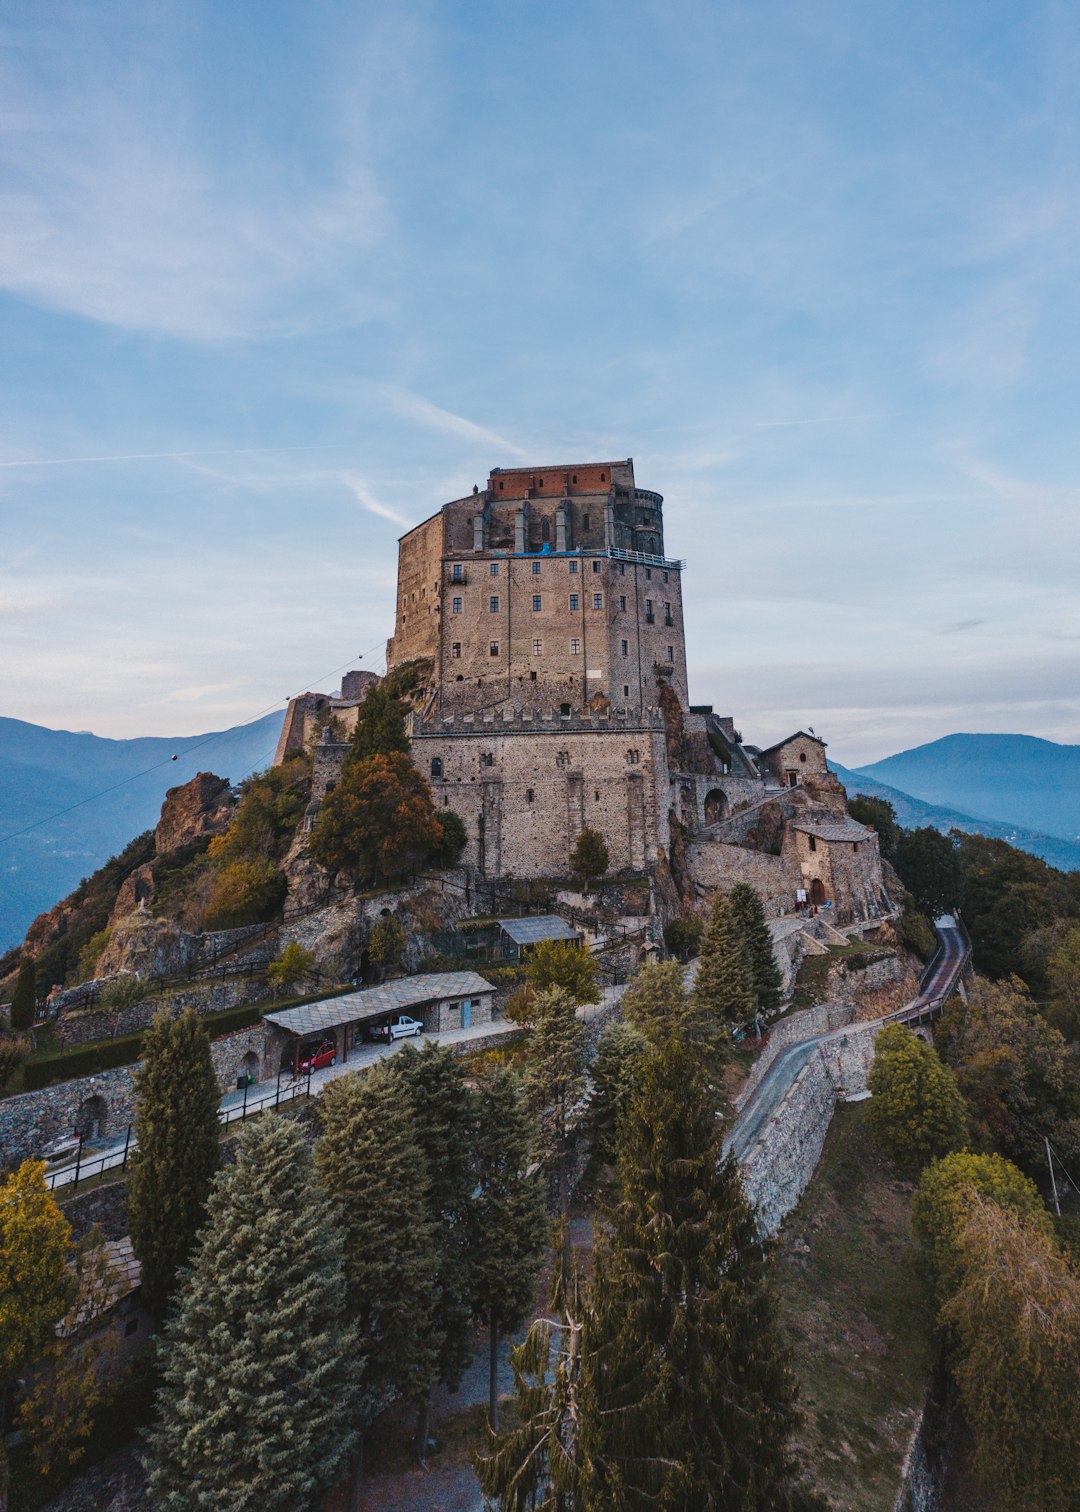 Travel Tips and Stories of Sacra di San Michele in Italy